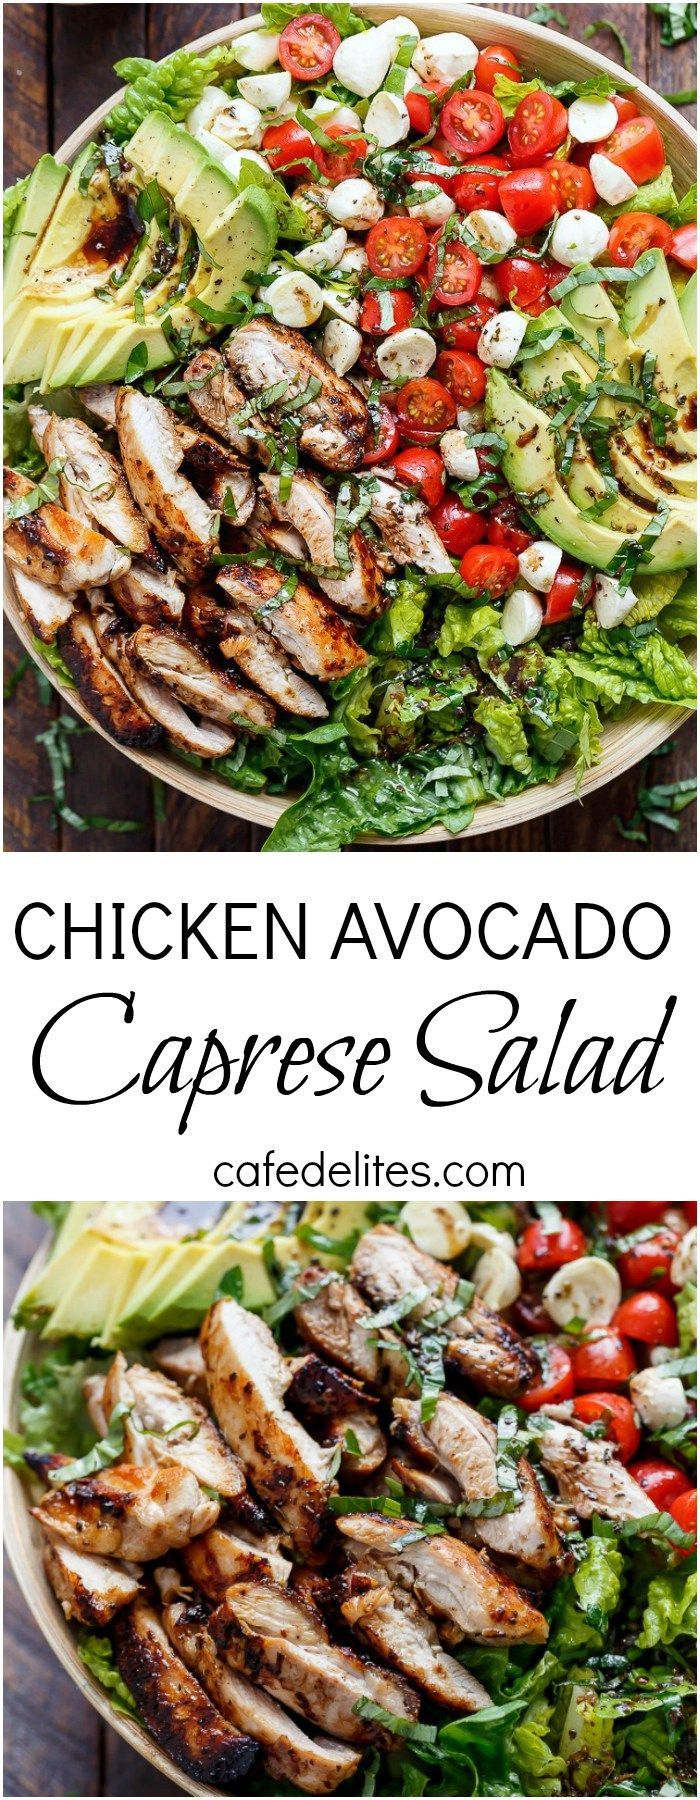 Balsamic Chicken Avocado Caprese Salad is a quick and easy meal in a salad drizzled with a balsamic dr